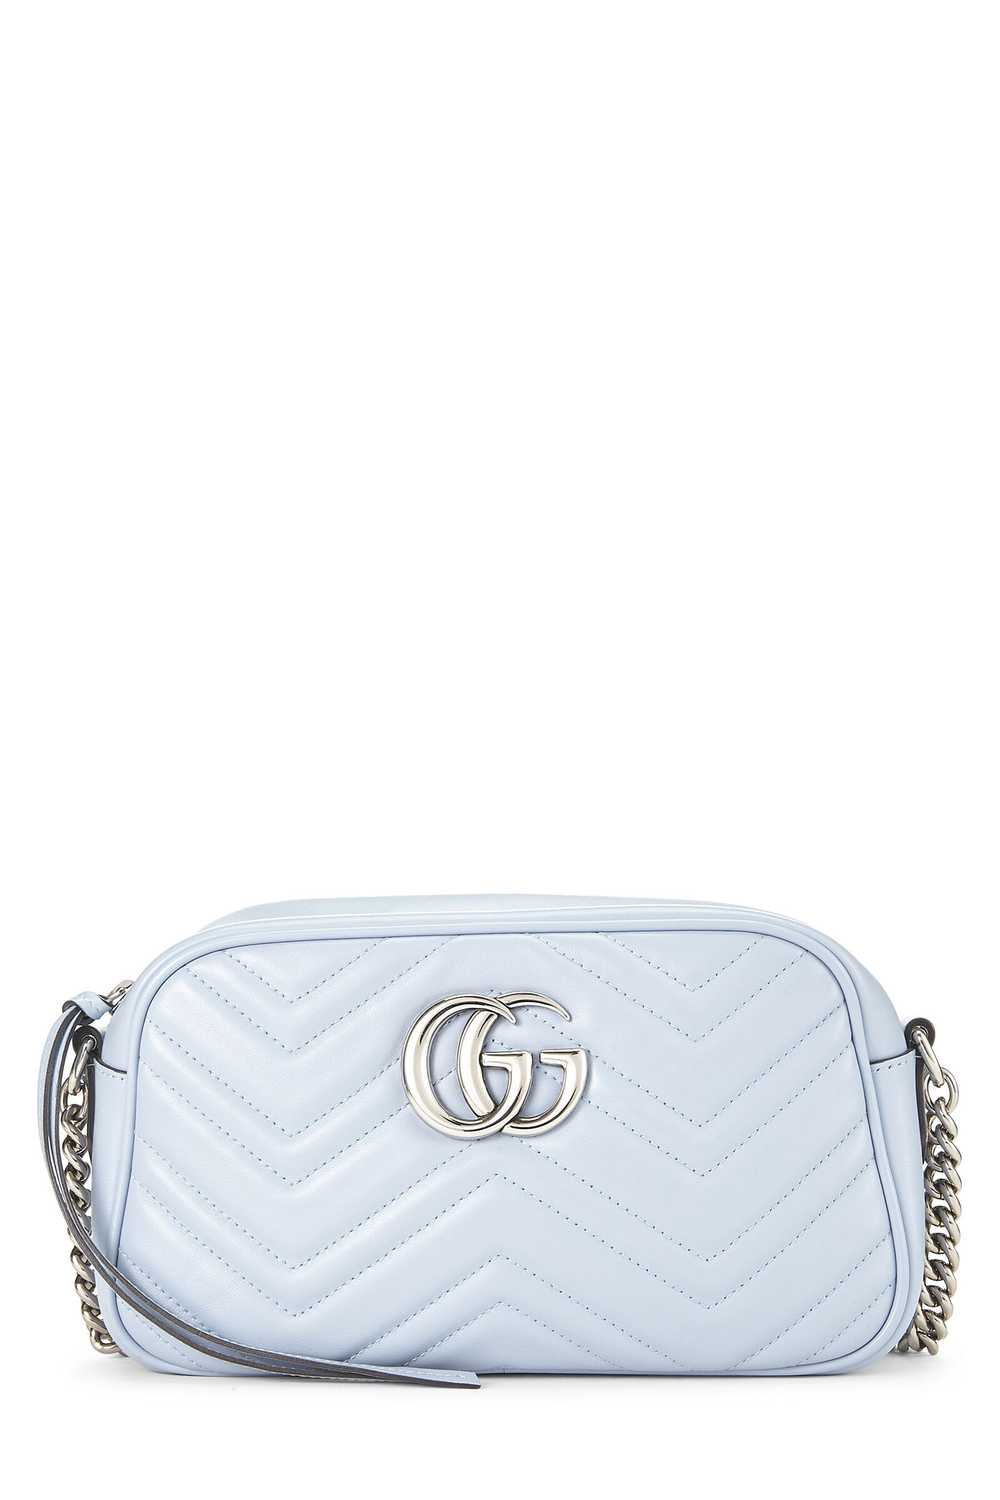 Blue Leather GG Marmont Crossbody Small - image 1